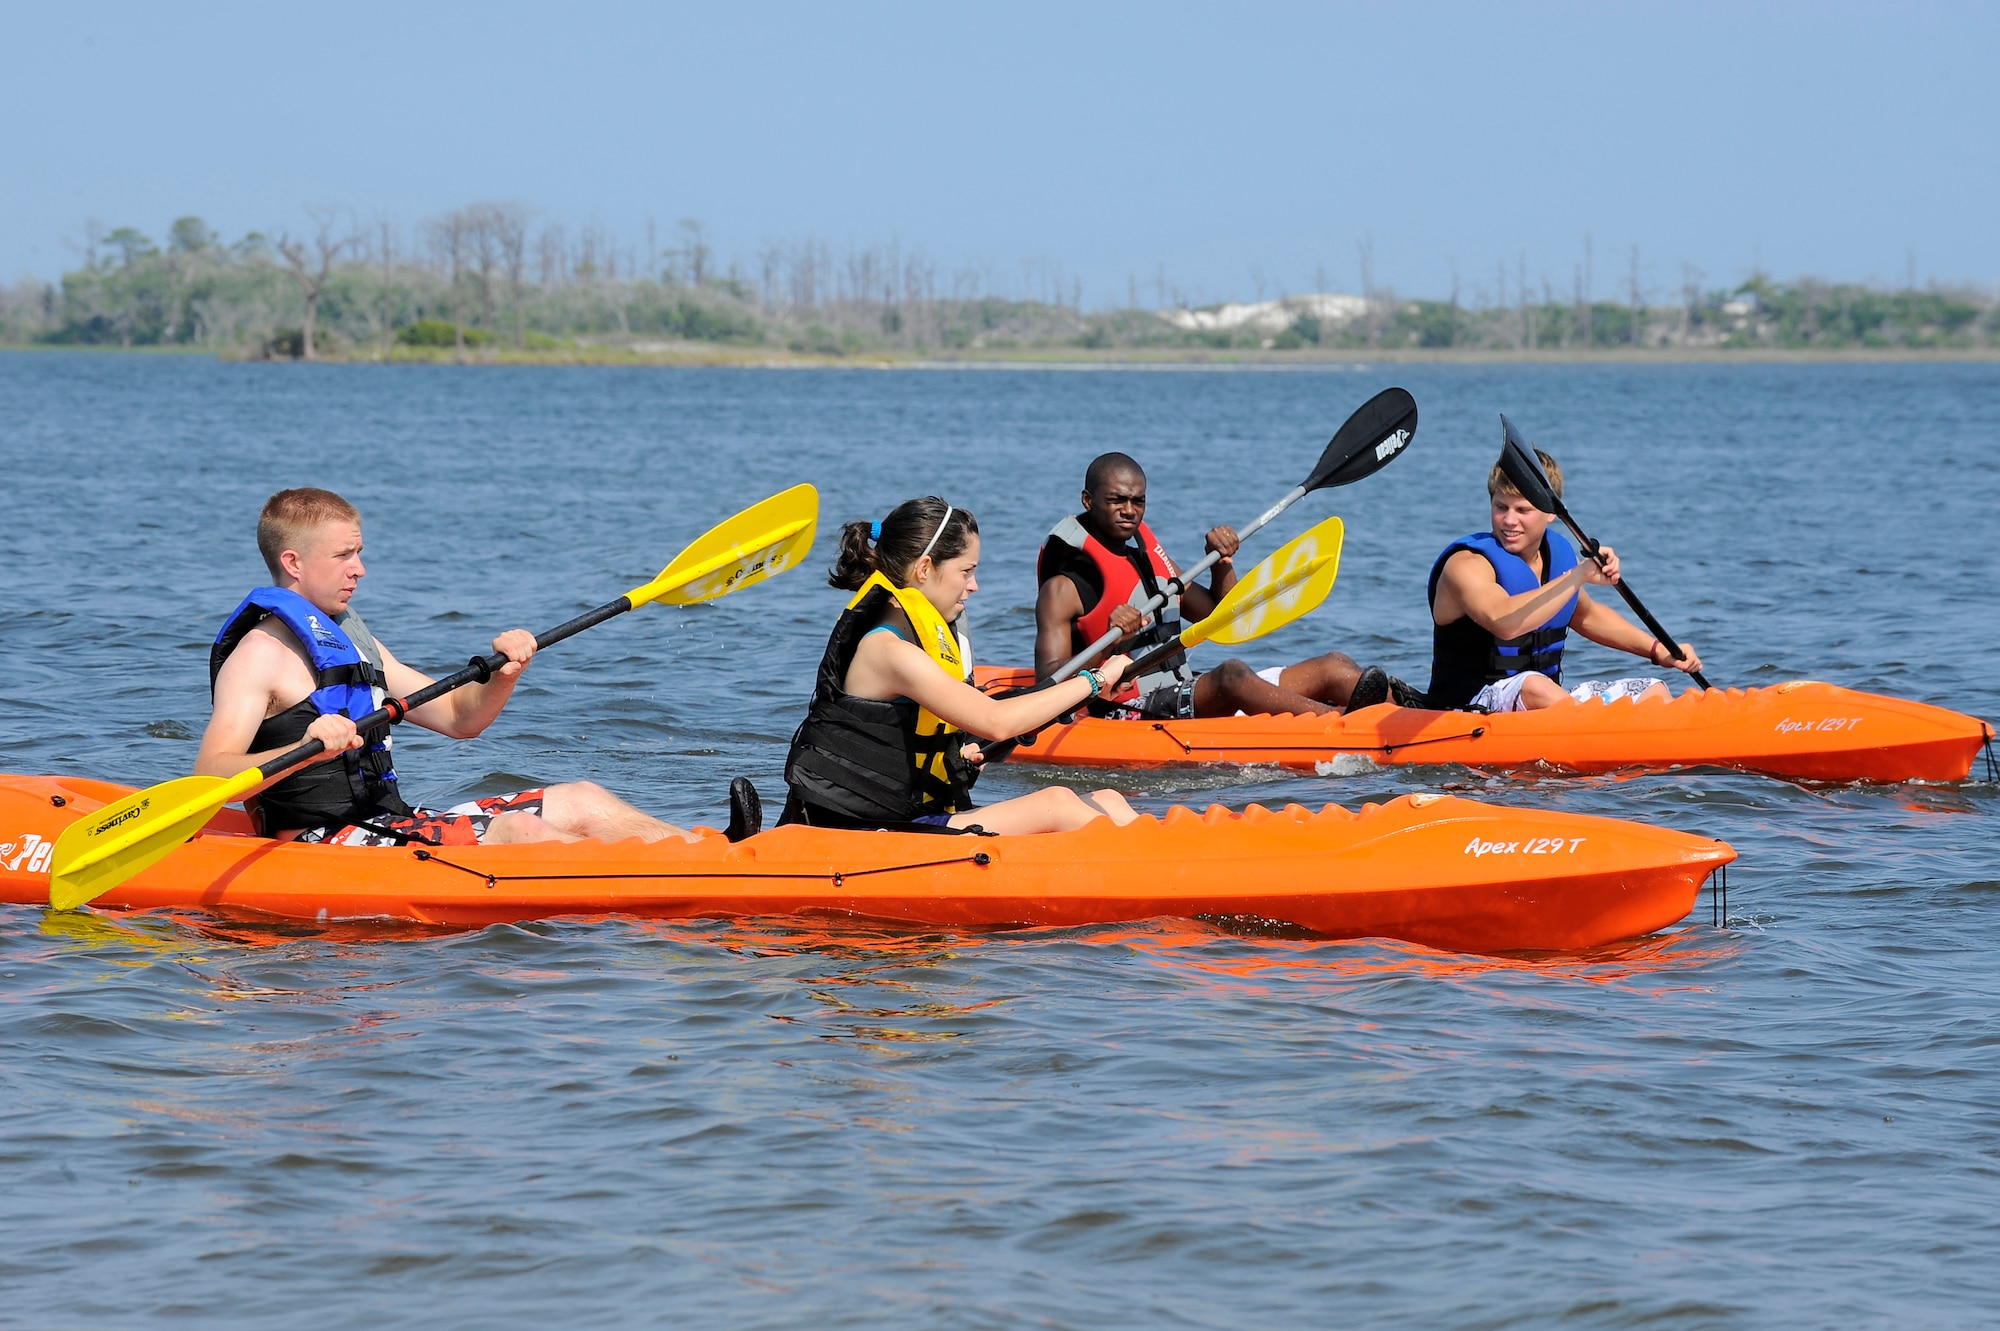 HURLBURT FIELD, Fla. ? Participants of Operation Purple practice kayaking on the Sound June 9, 2009. The volunteers were participating in an eight day team building and leadership camp. Half the volunteers will become mentors for future Operation Purple camps. Operation Purple is an eighteen day team camp for children whose parents are deployed. (U.S. Air Force photo/Senior Airman Jason Epley)